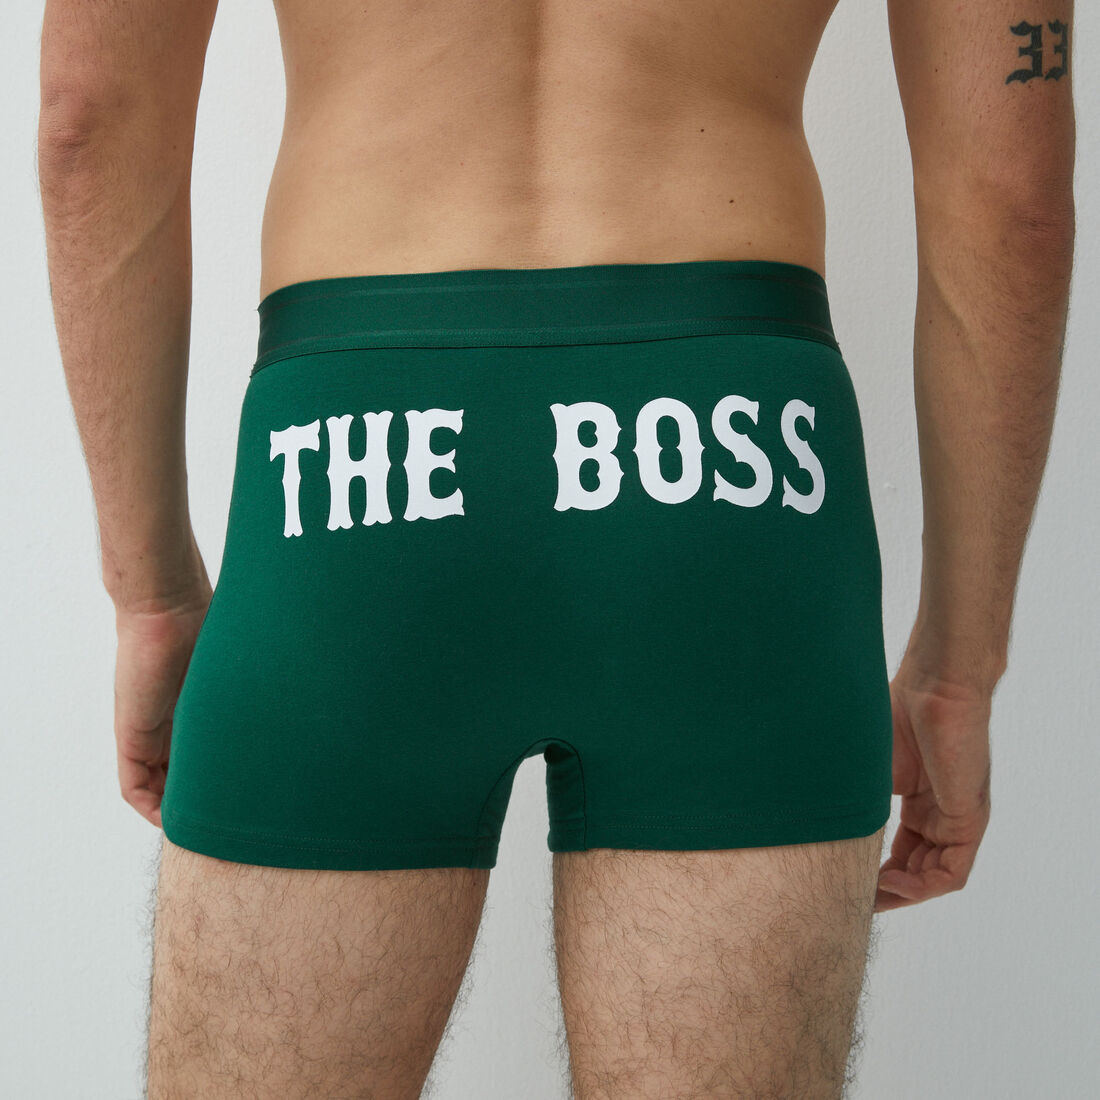 boxer shorts with "the boss" slogan;